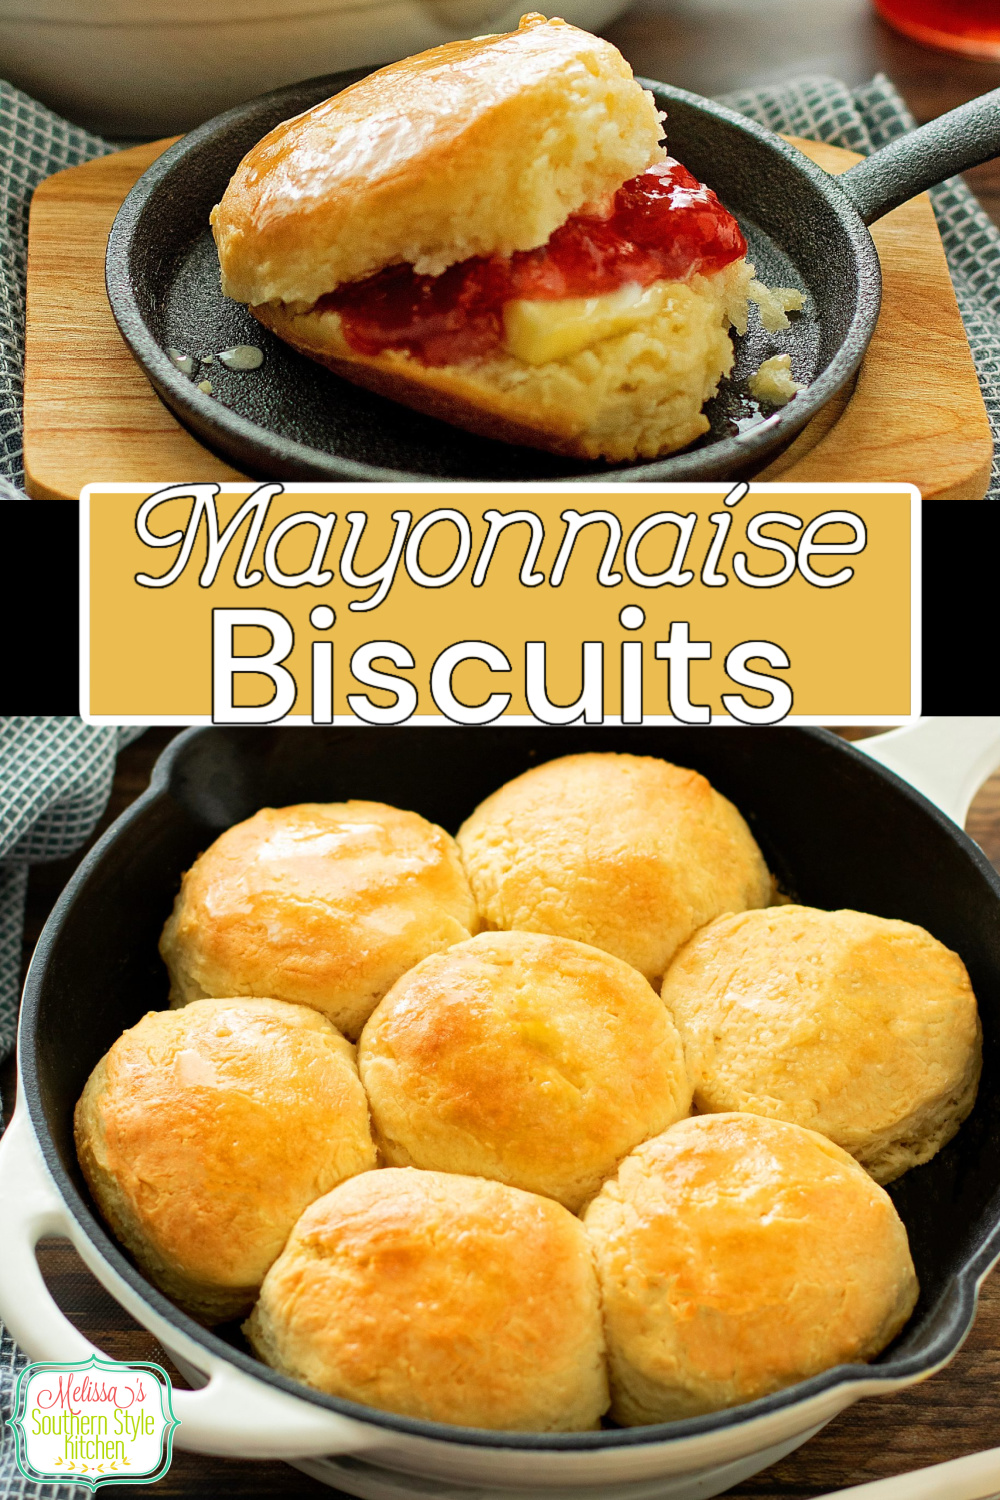 This Mayonnaise Biscuits recipe is one you can serve straight from the oven with butter and jam or as the complementary bread at any meal #southernbiscuits #biscuitrecipes #buttermilkbiscuits #mayonnaisebiscuits #bestbiscuitrecipe via @melissasssk